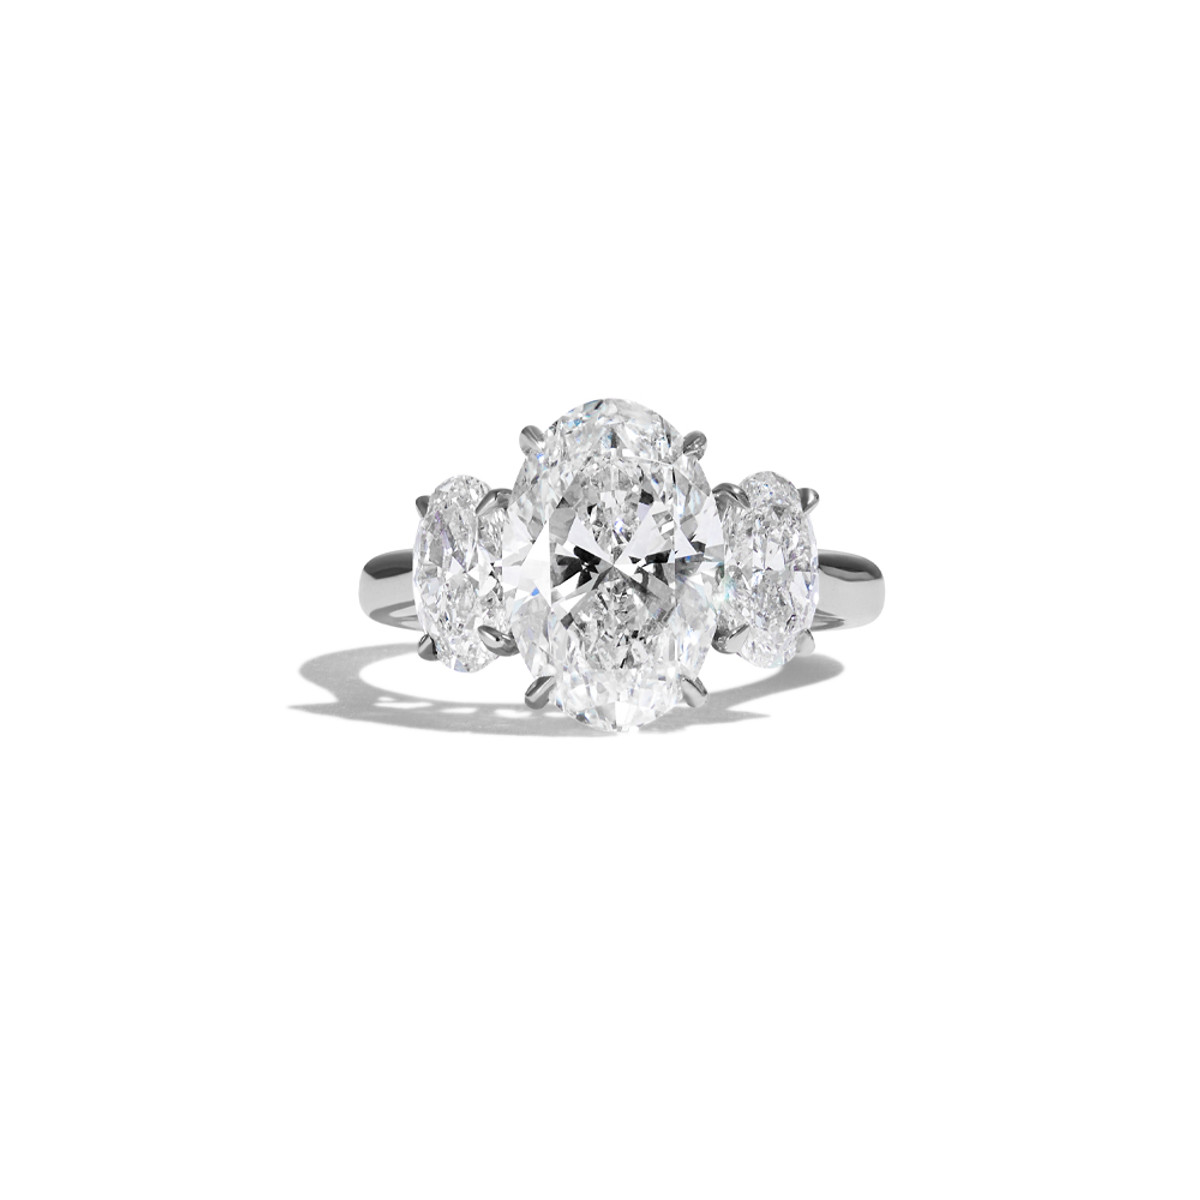 PLATINUM HYDE PARK 3.50CT OVAL THREE STONE ENGAGEMENT RING-49023 Product Image